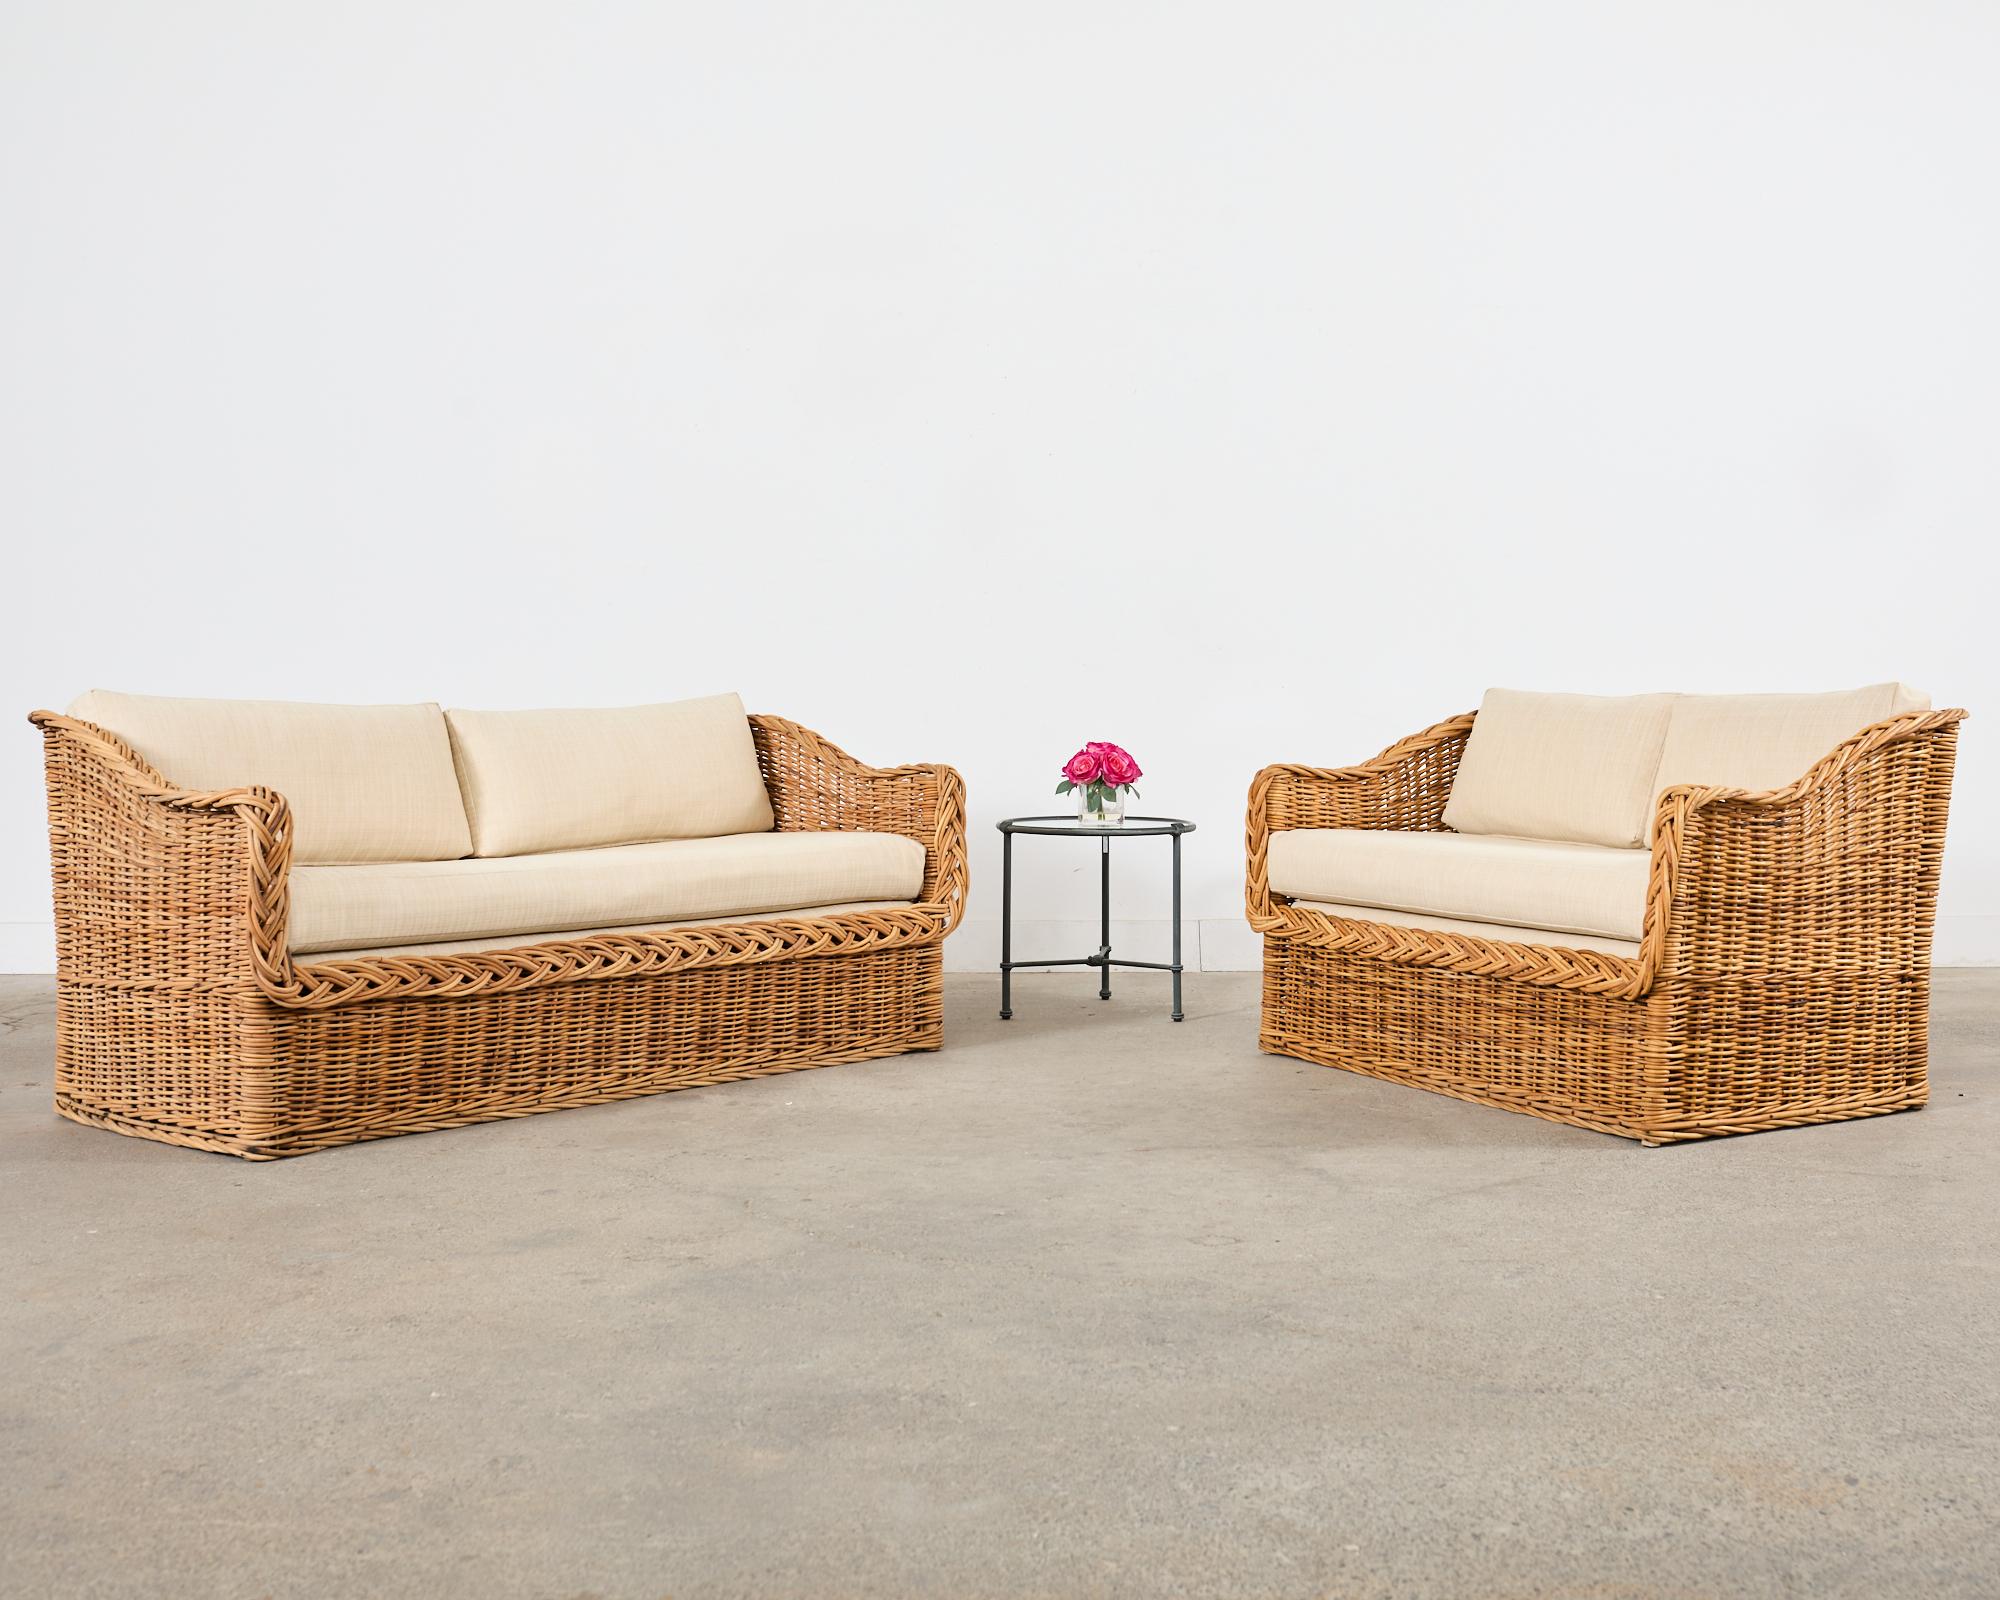 Organic modern rattan sofa hand-crafted by The Wicker Works in Italy. Made in the California coastal manner and style of Michael Taylor designs. Known as the 